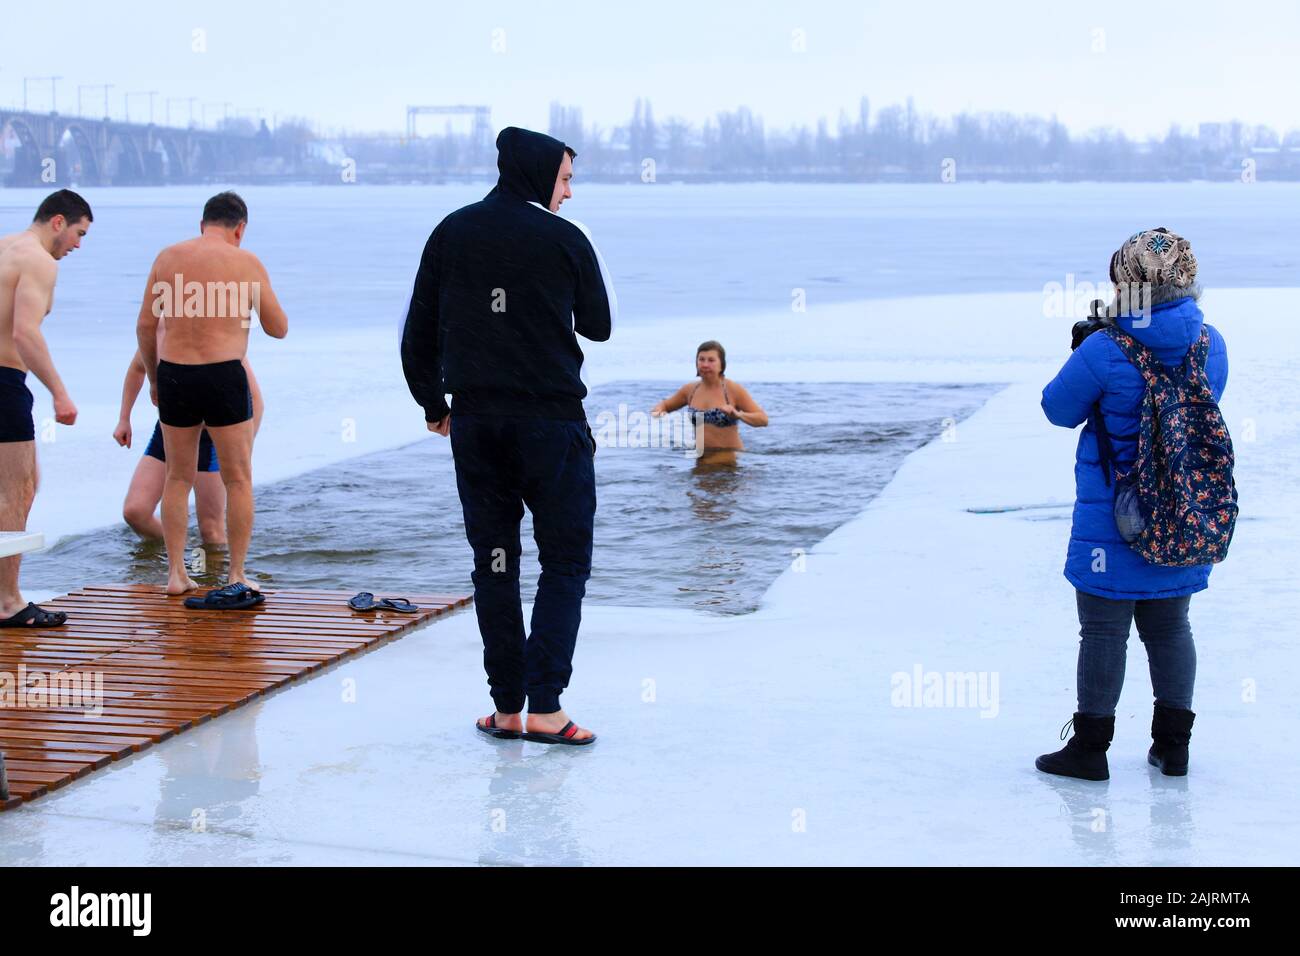 Winter sports, hardening. People stand and swim in the winter in the ice hole on the Dnieper River during the Orthodox holiday Epiphany. Dnipro city Stock Photo